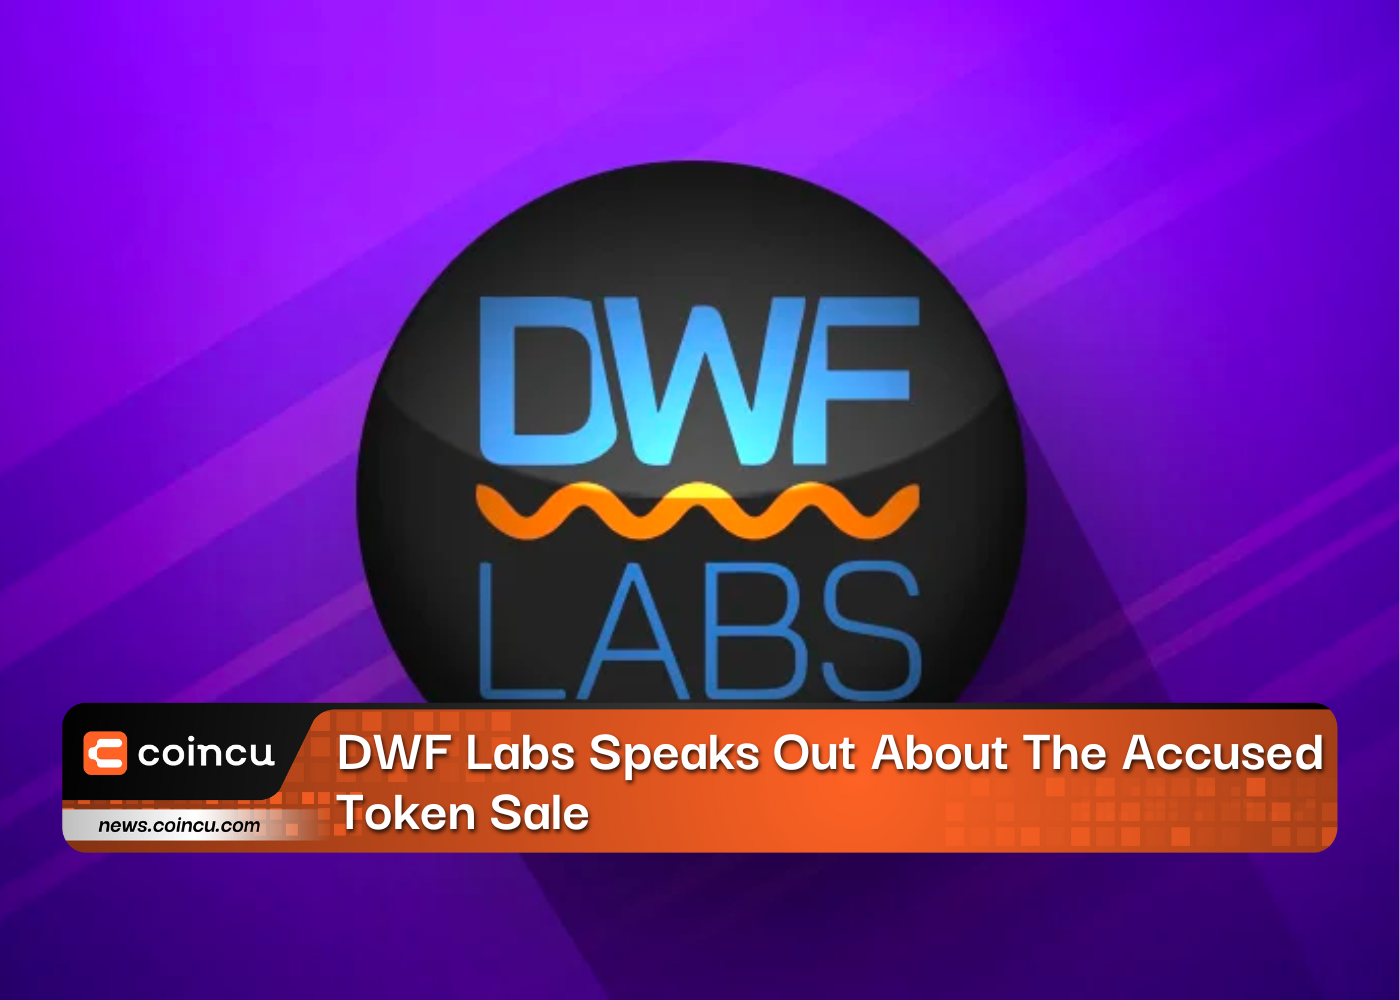 DWF Labs Speaks Out About The Accused Token Sale